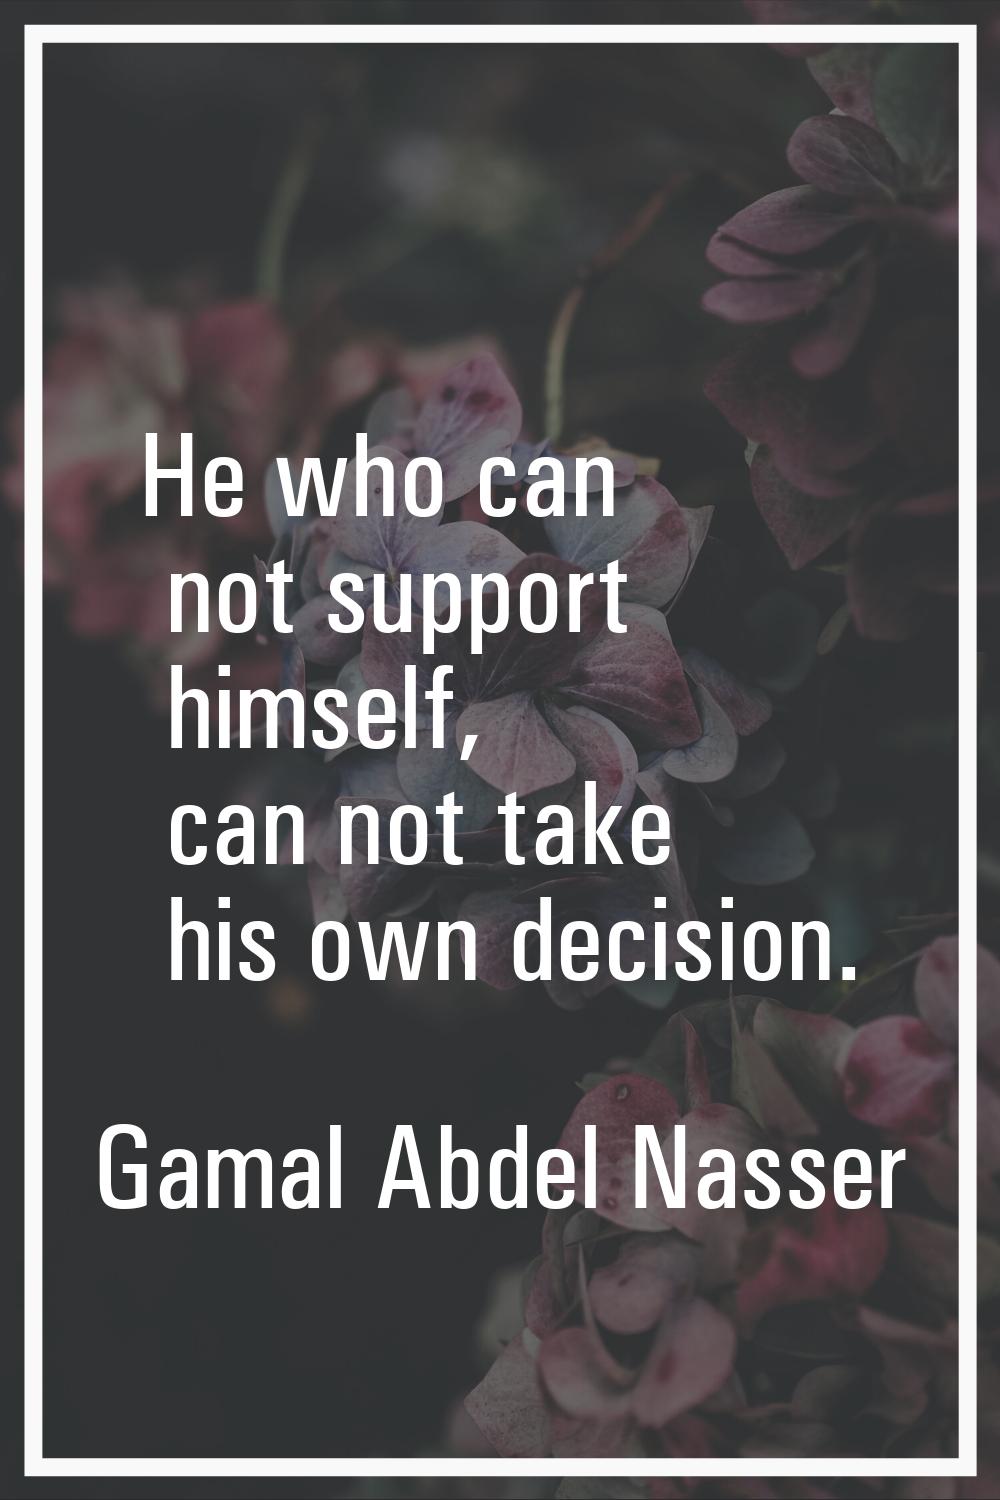 He who can not support himself, can not take his own decision.